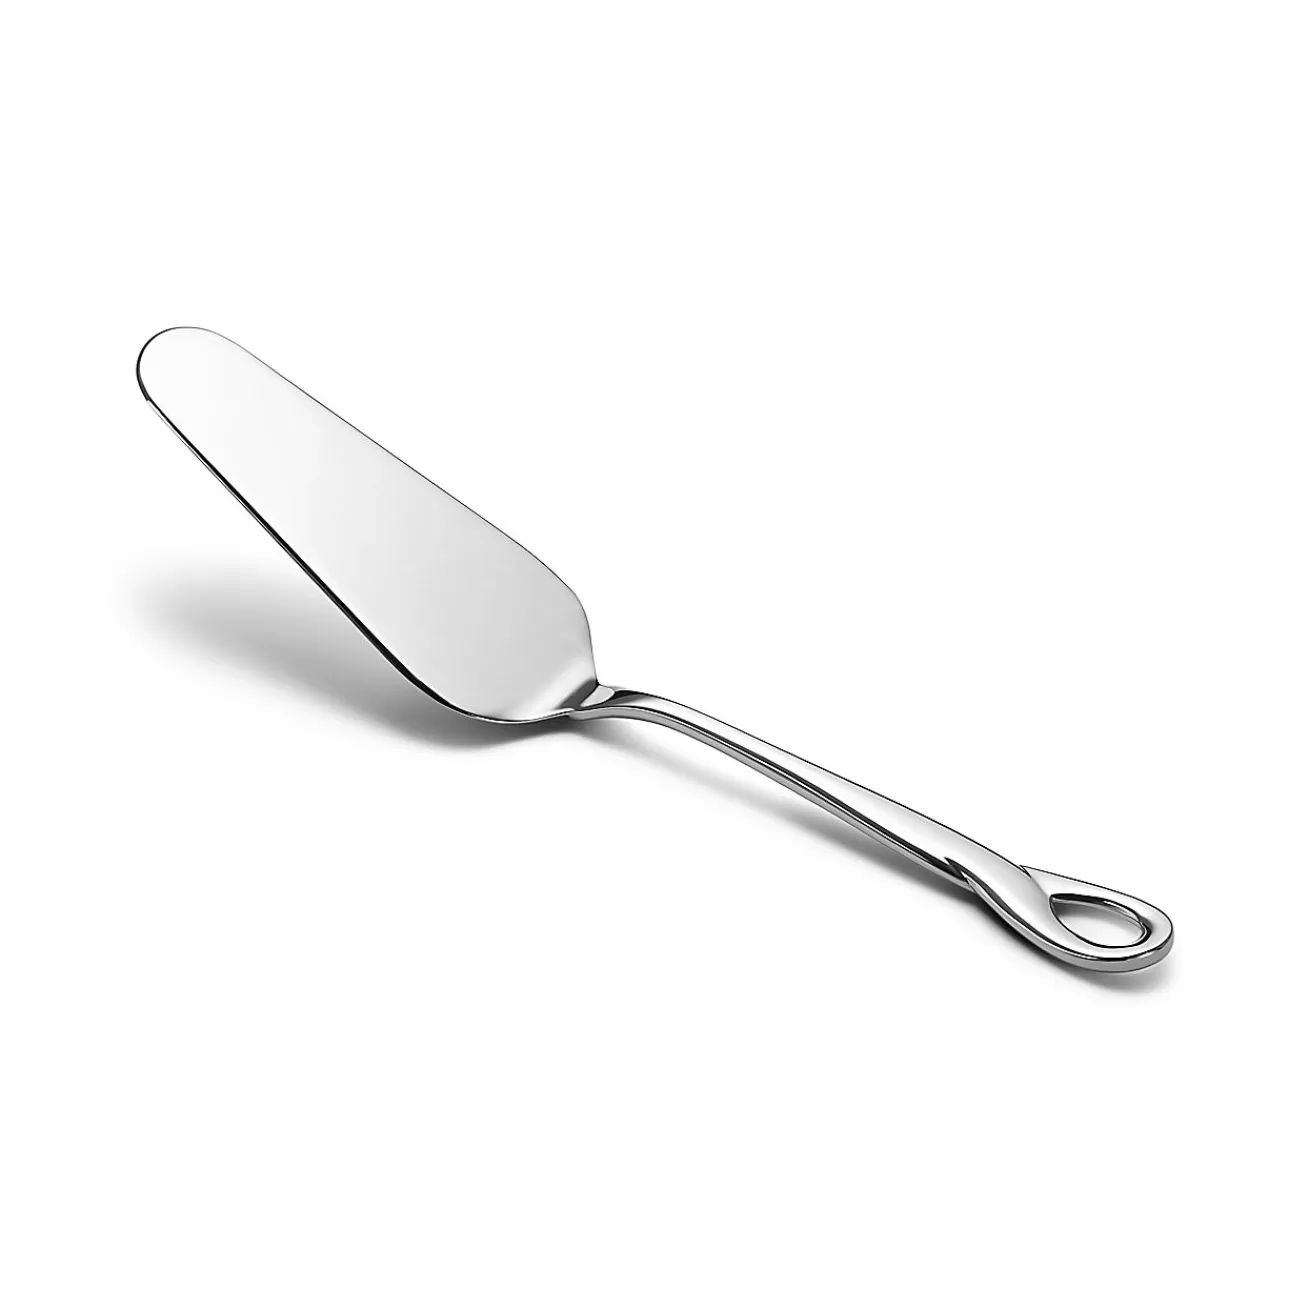 Tiffany & Co. Elsa Peretti® Padova™ pie server in sterling silver. | ^ The Couple | Wedding Gifts